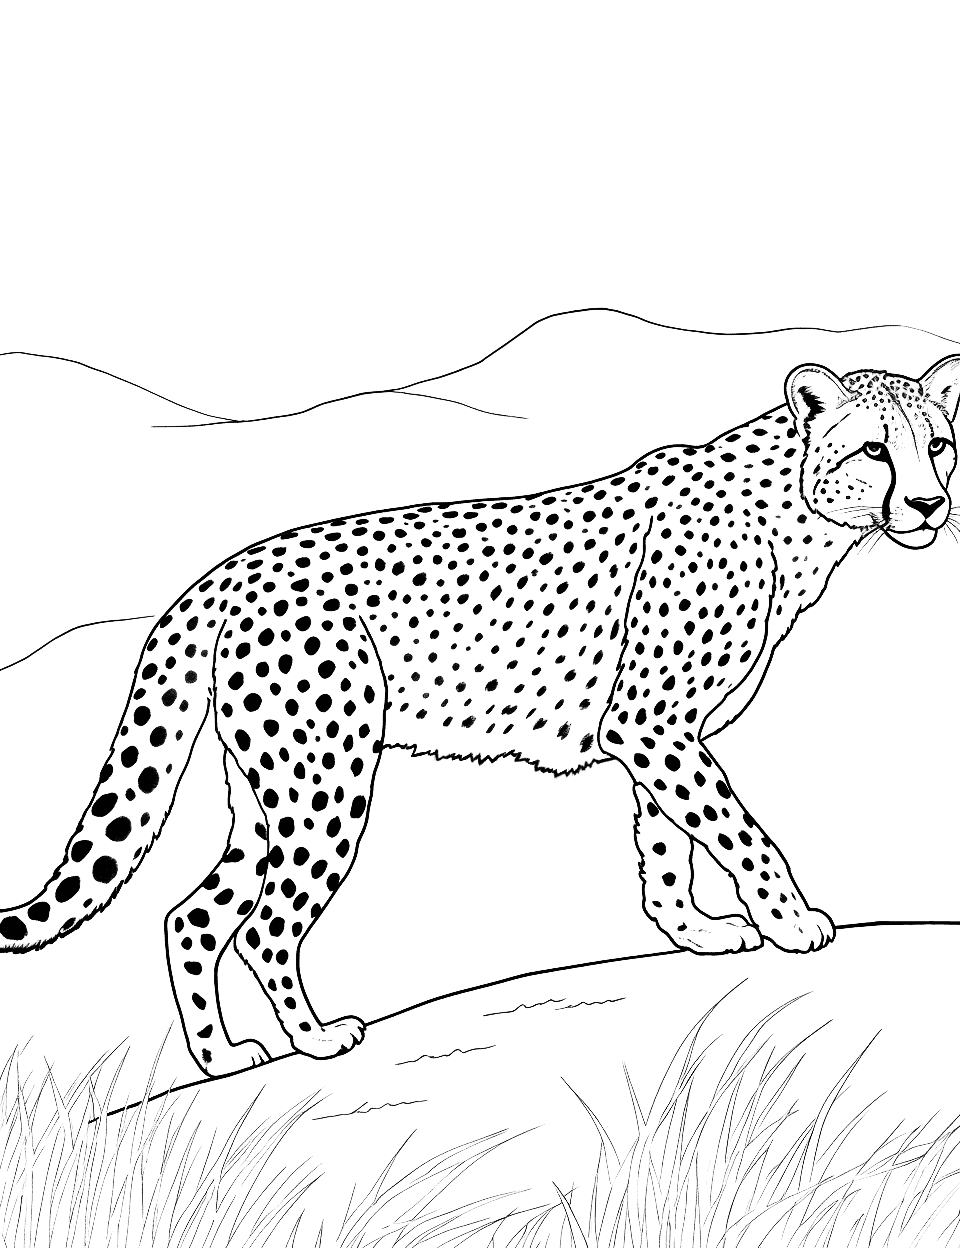 Cheetah on the Prowl Animal Coloring Page - A cheetah stealthily stalking its prey across the grasslands.